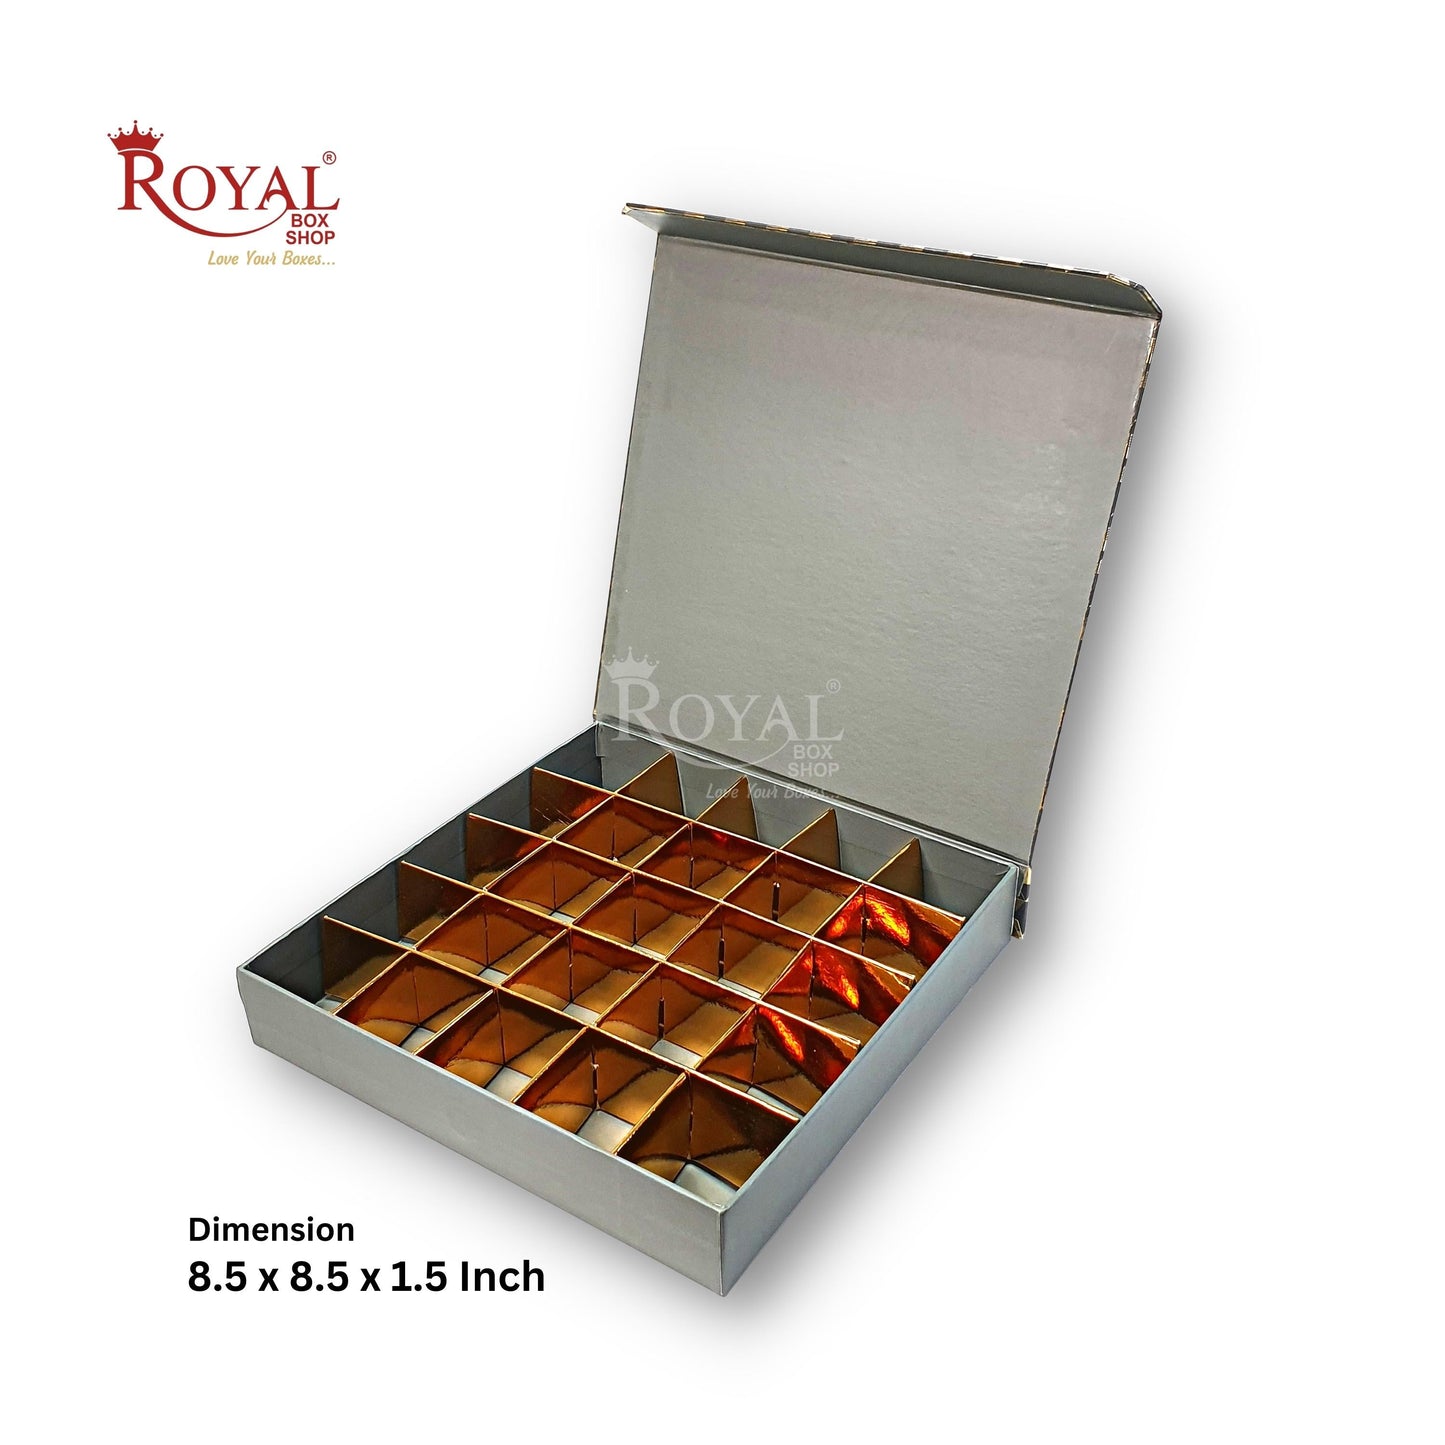 Rigid Chocolate Boxes 25 Cavity With Magnetic Flap I Grey with Gold Foiling I 9.5 X 9.5 X 1.5 Inch I Kappa Boxes Royal Box Shop